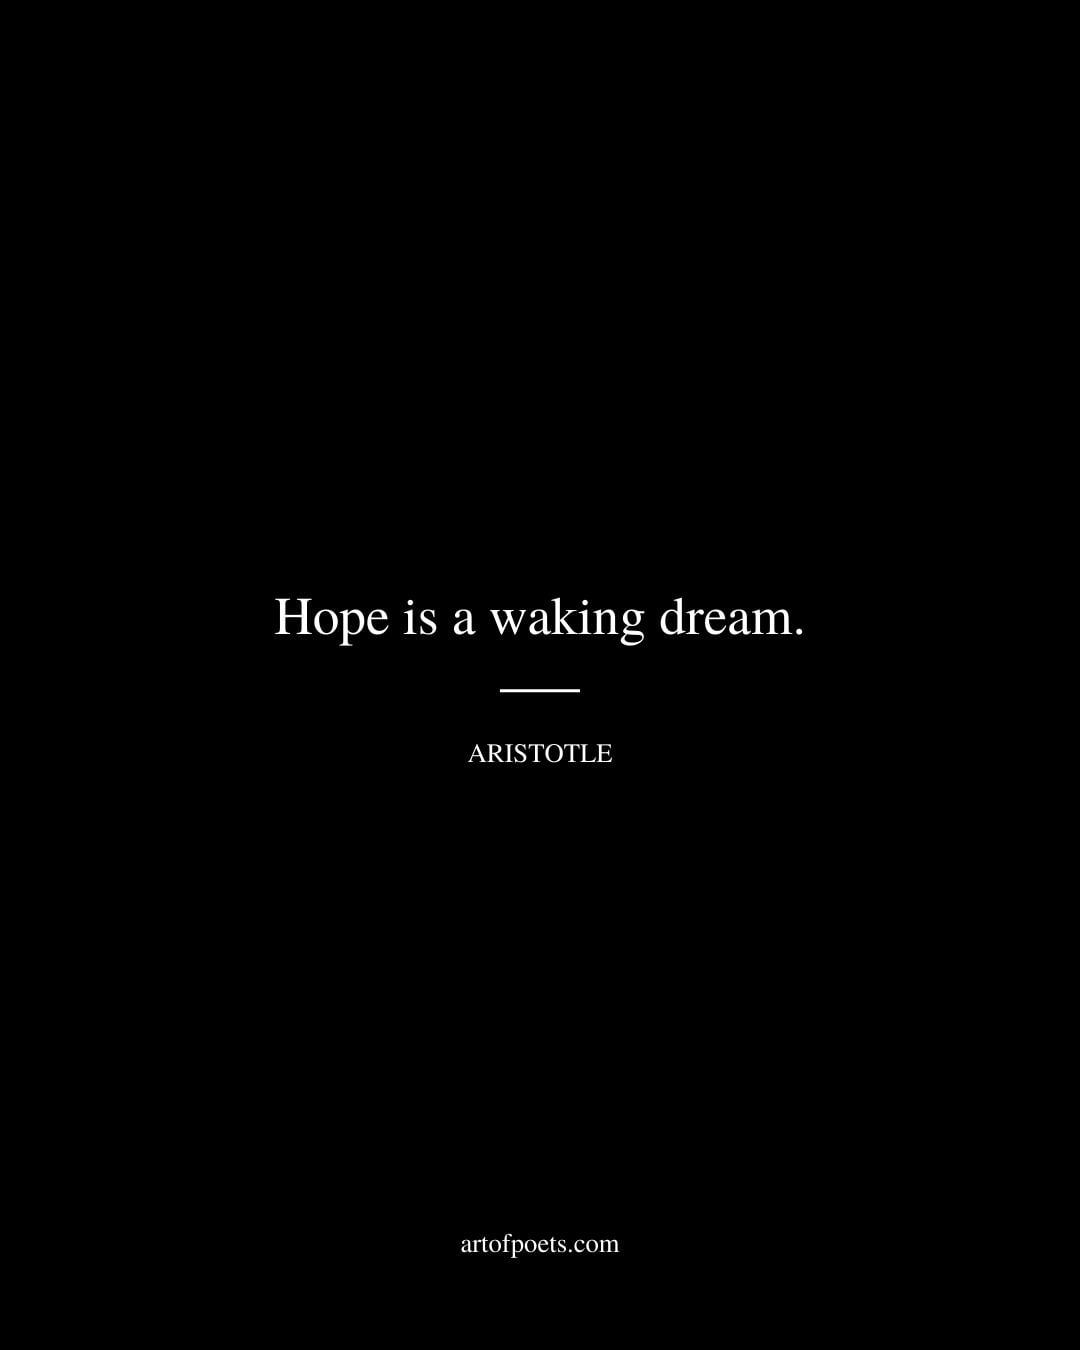 Hope is a waking dream. Aristotle